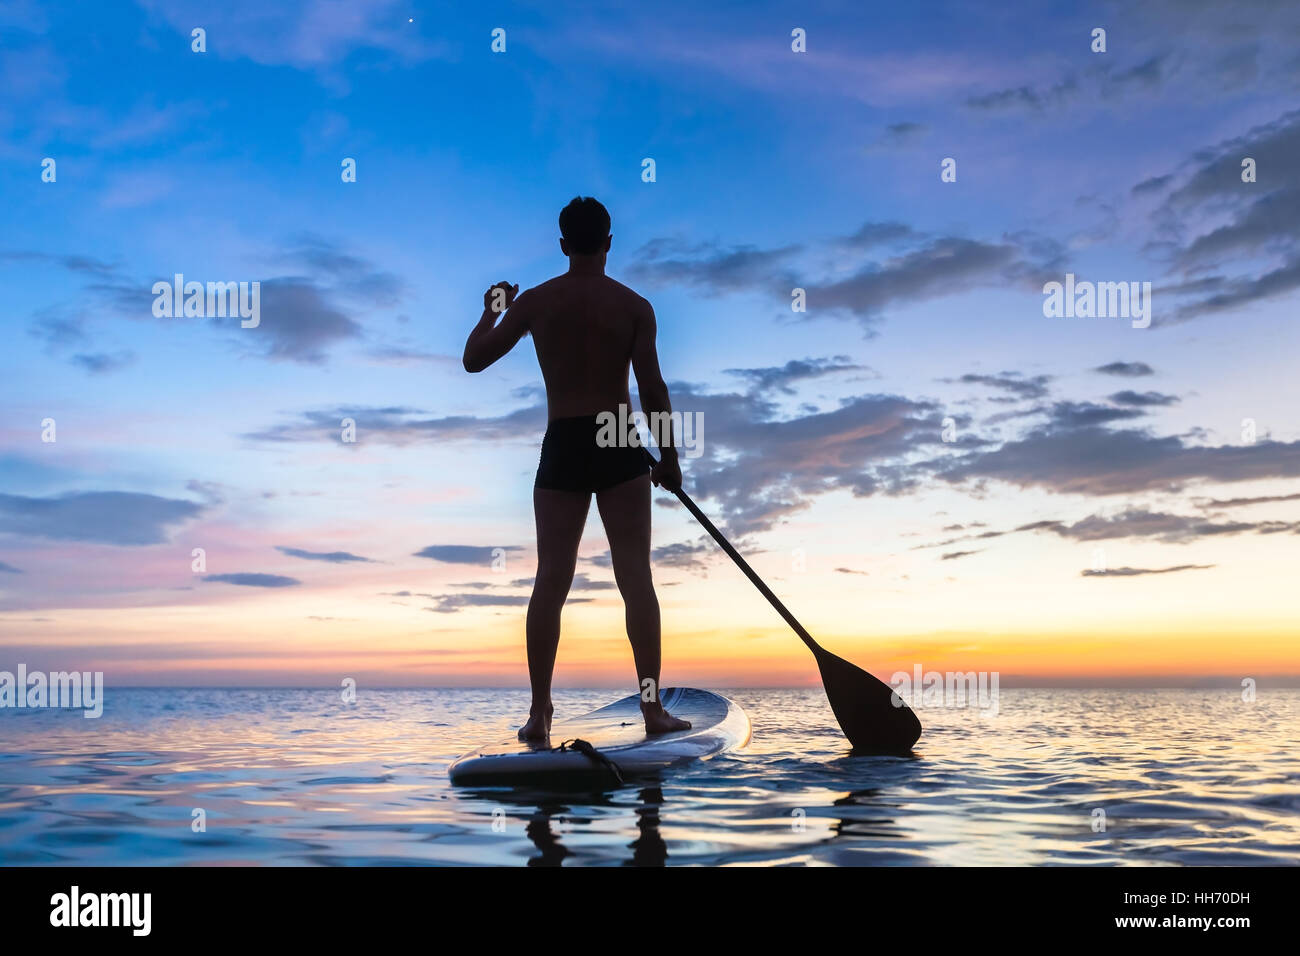 Silhouette of stand up paddle boarder paddling at sunset on a flat warm quiet sea Stock Photo